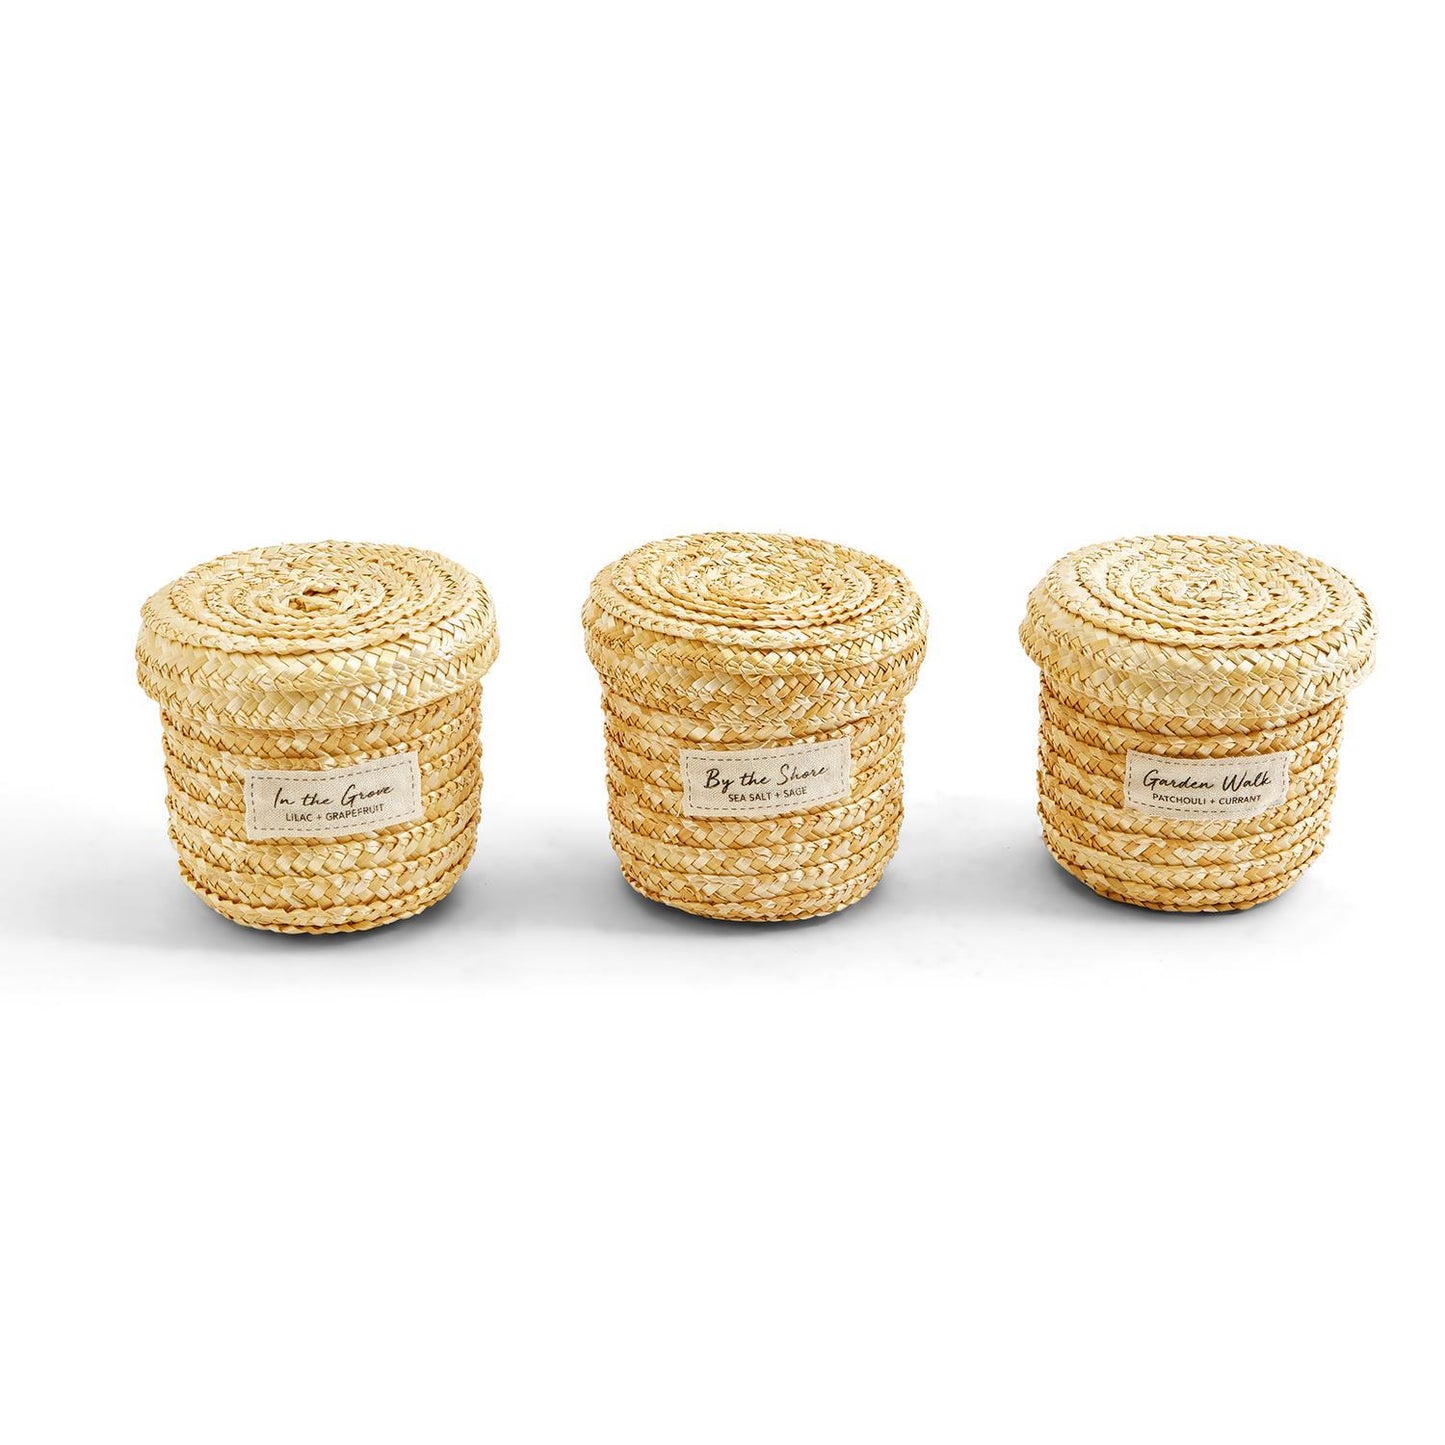 Nature's Basket Scented Candle in Straw Lidded Basket, Assorted 3 Scents